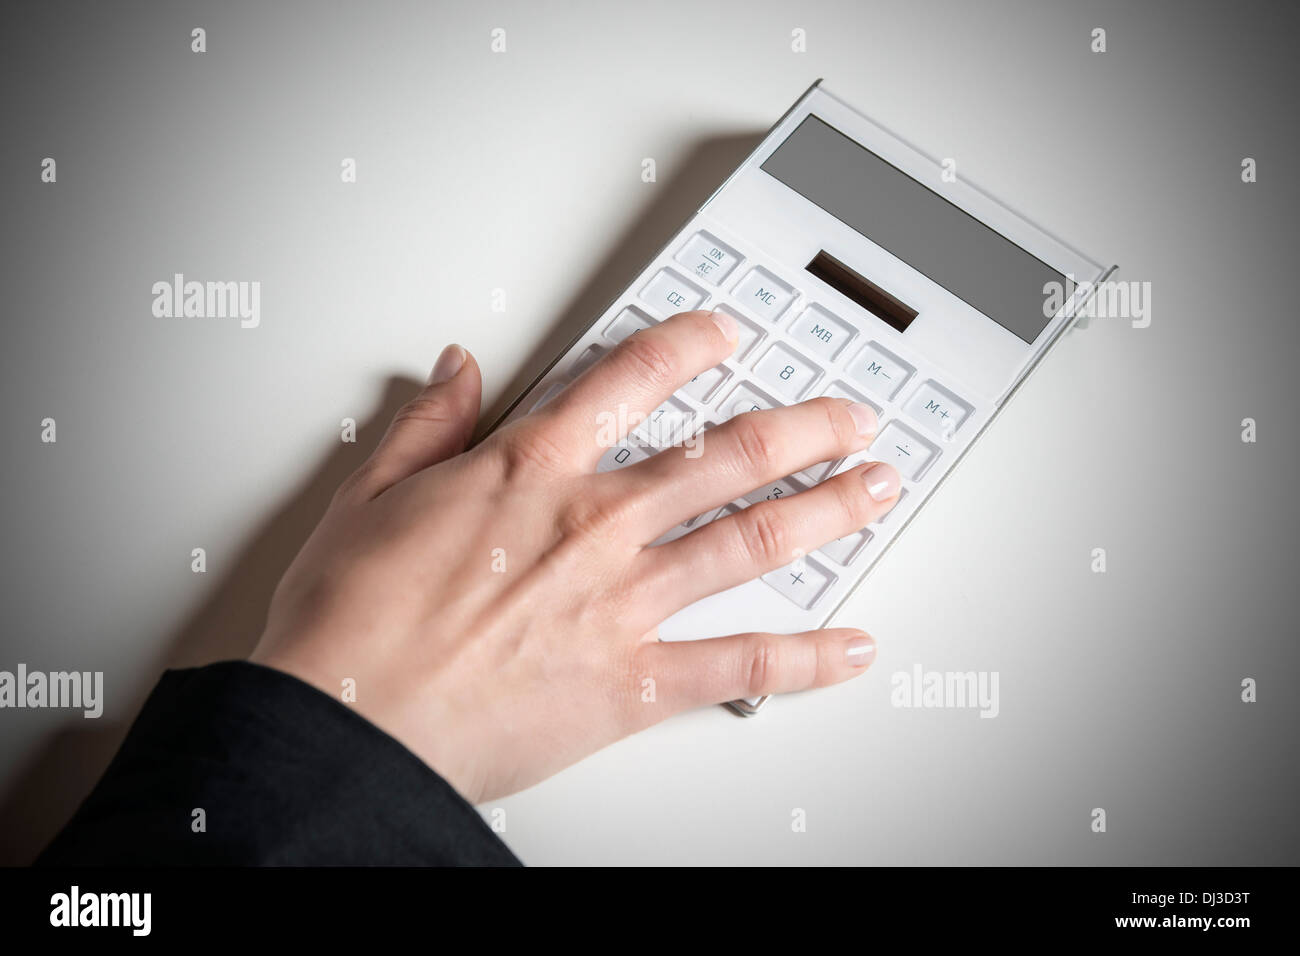 Picture of a female hand typing on a white calculator with empty display Stock Photo